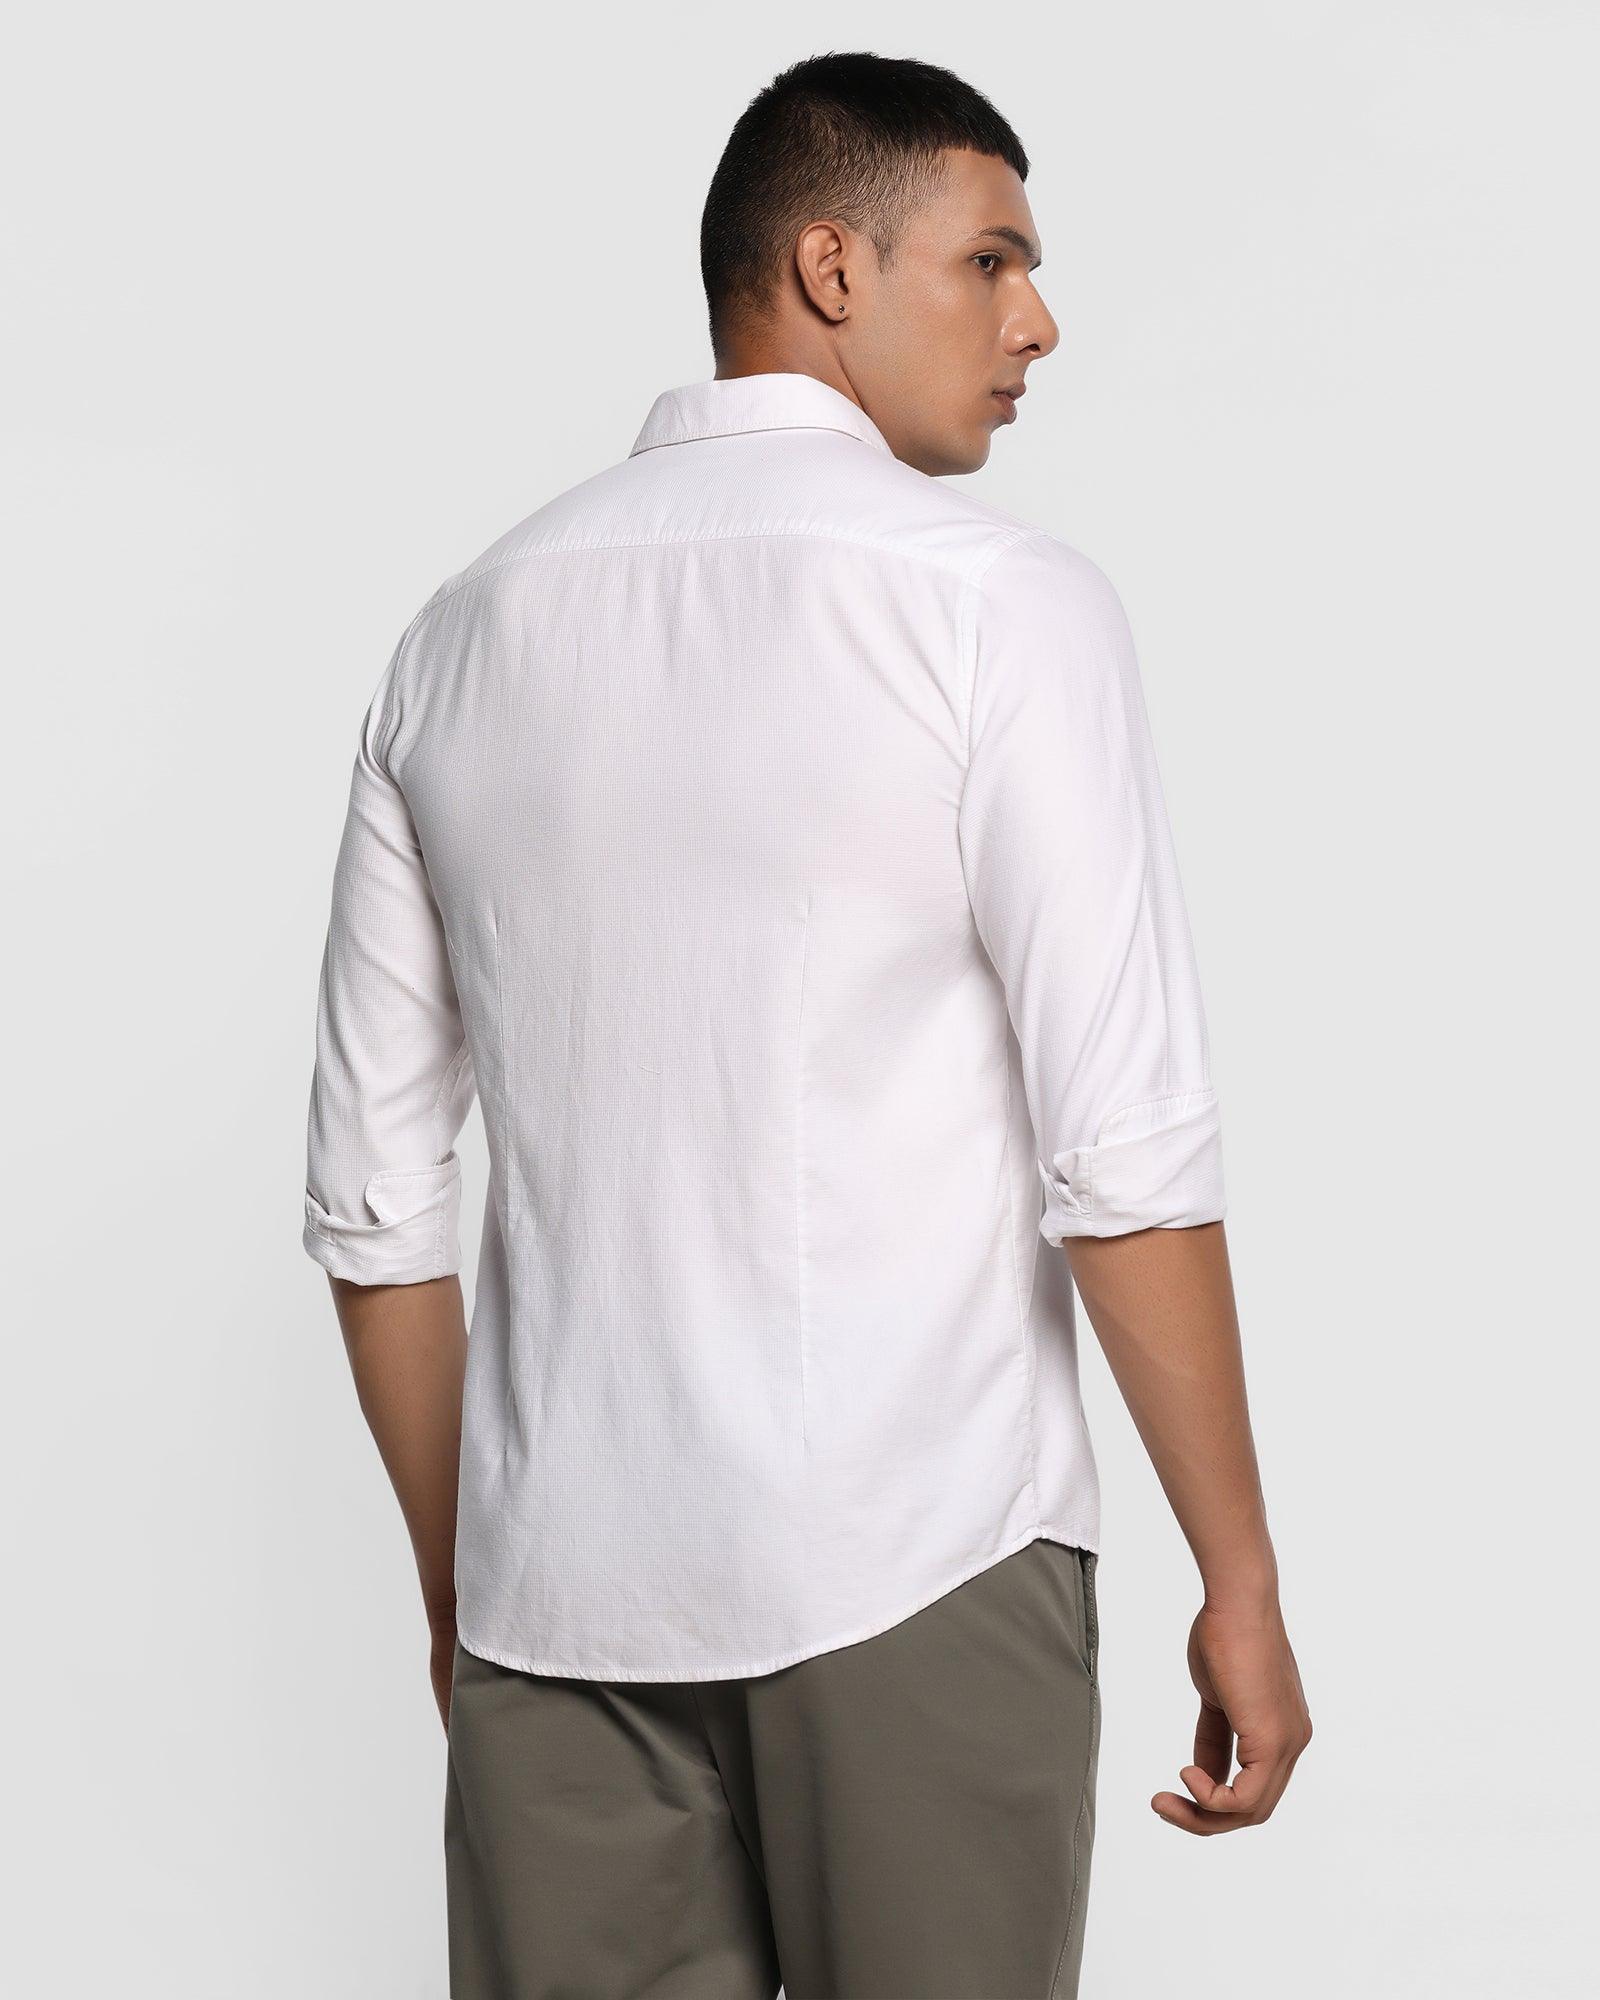 Casual White Textured Shirt - Colby